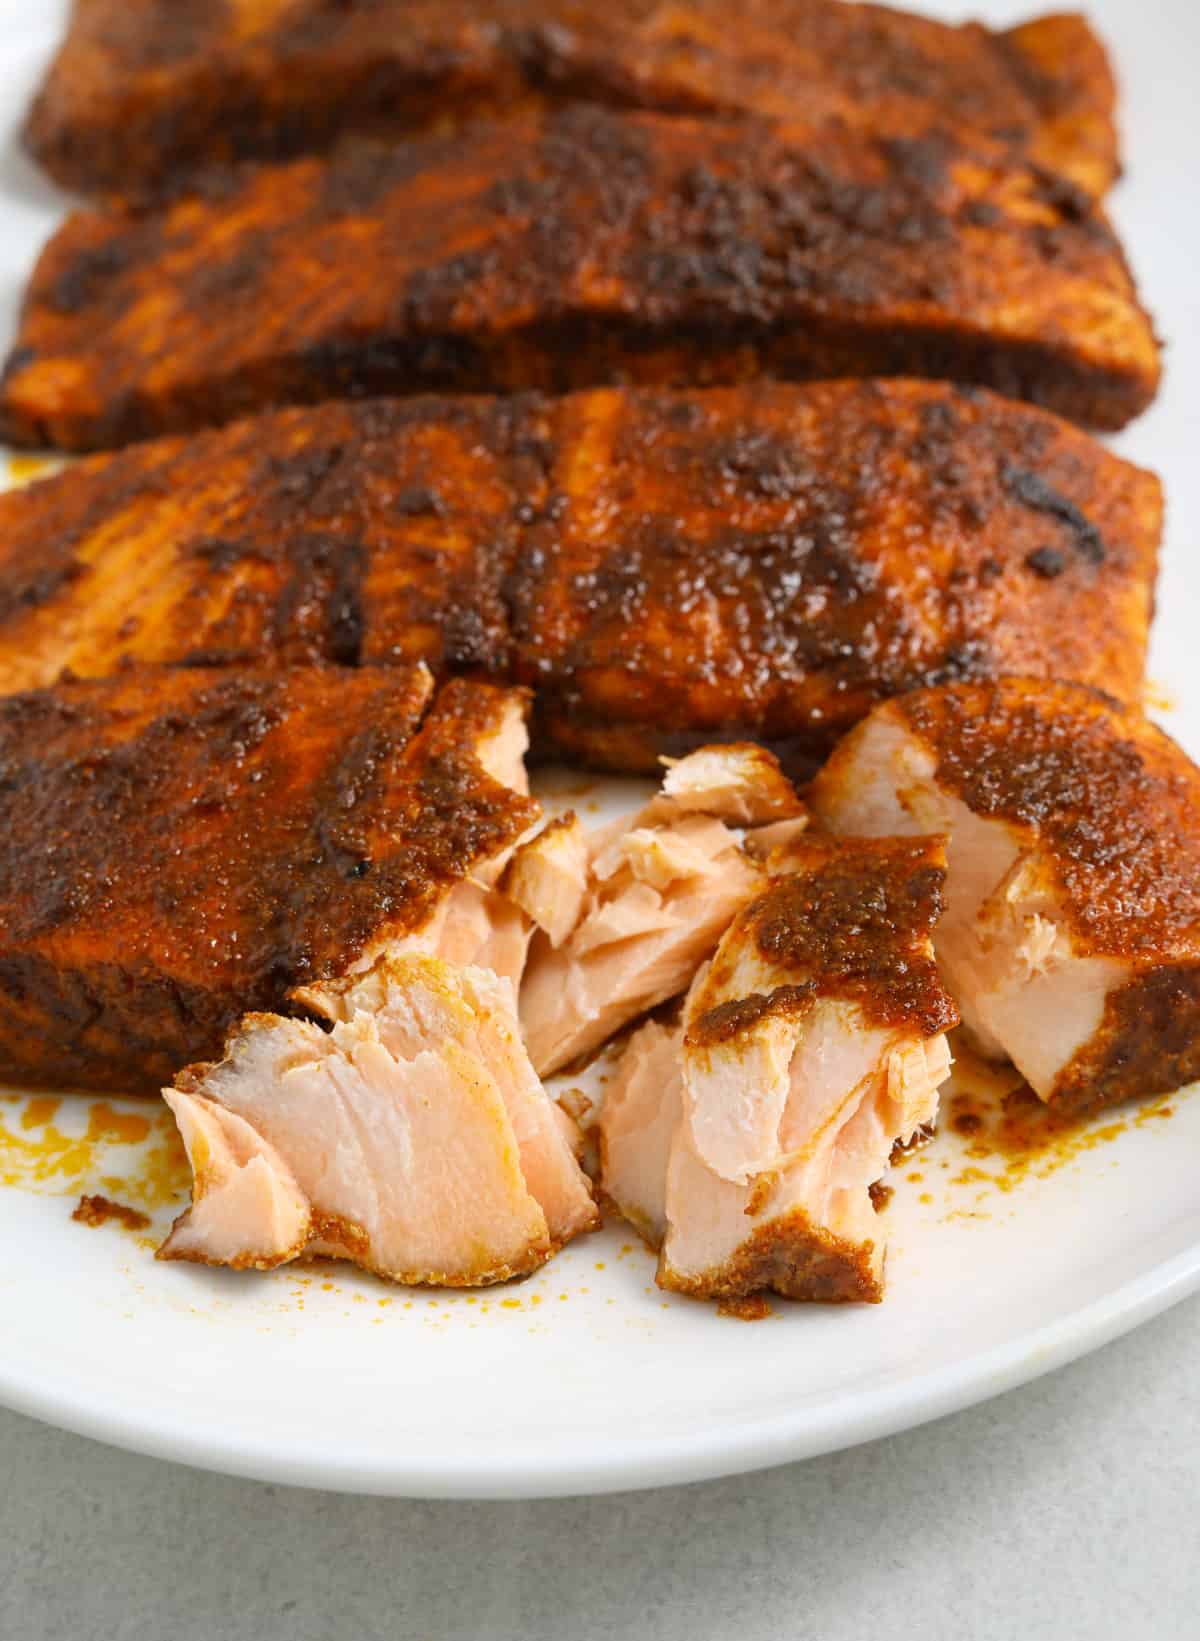 a close up image of BBQ salmon filets coated in spices on a white oval platter.